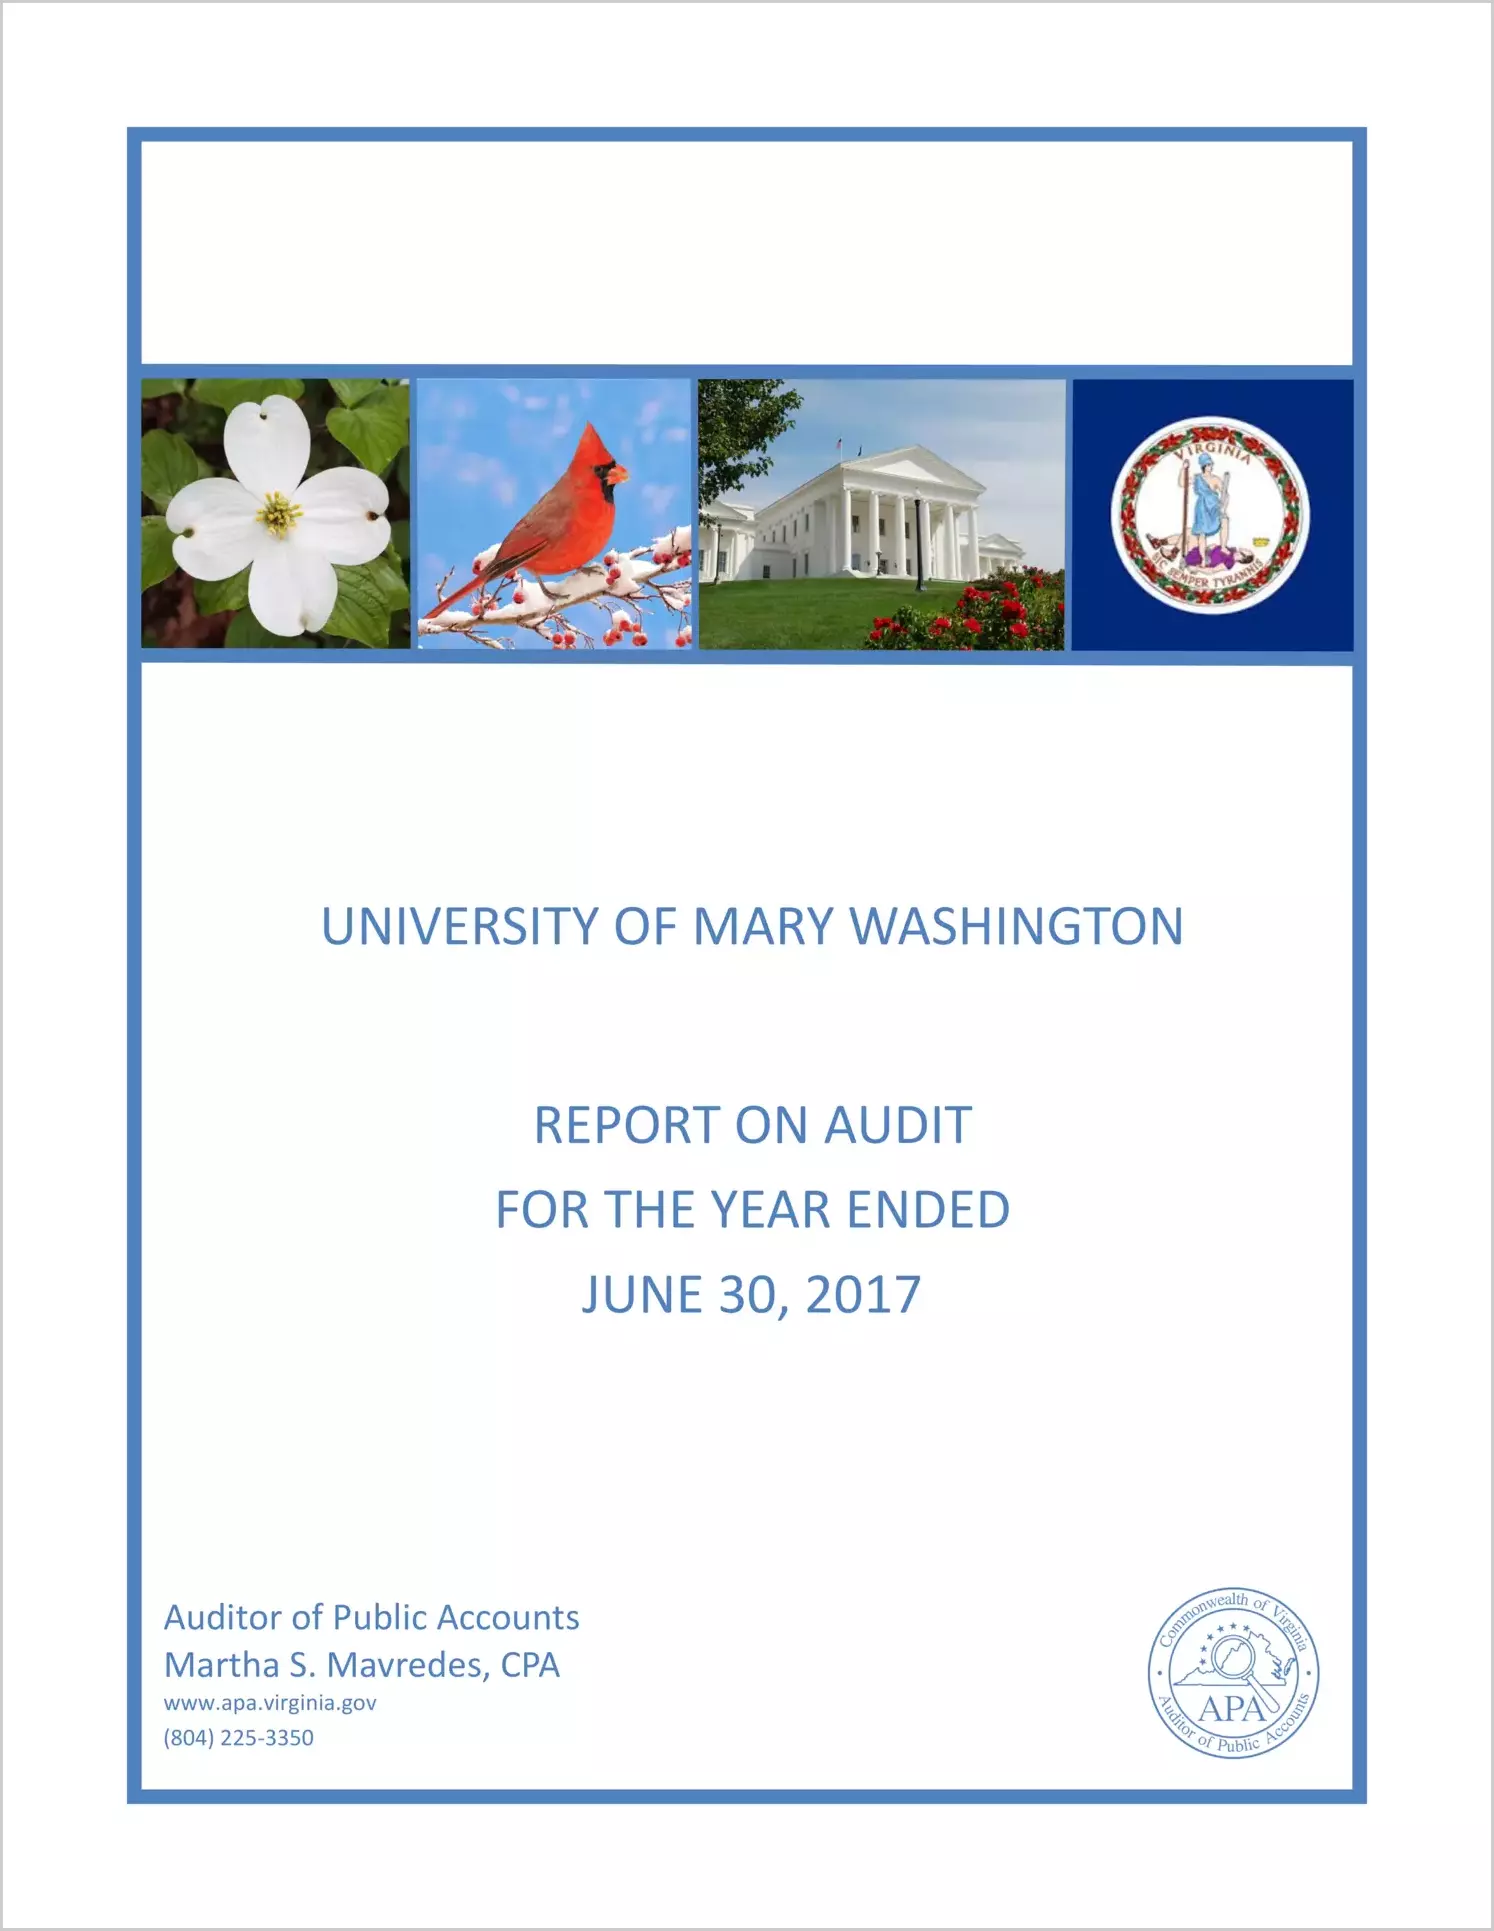 University of Mary Washington for the year ended June 30, 2017